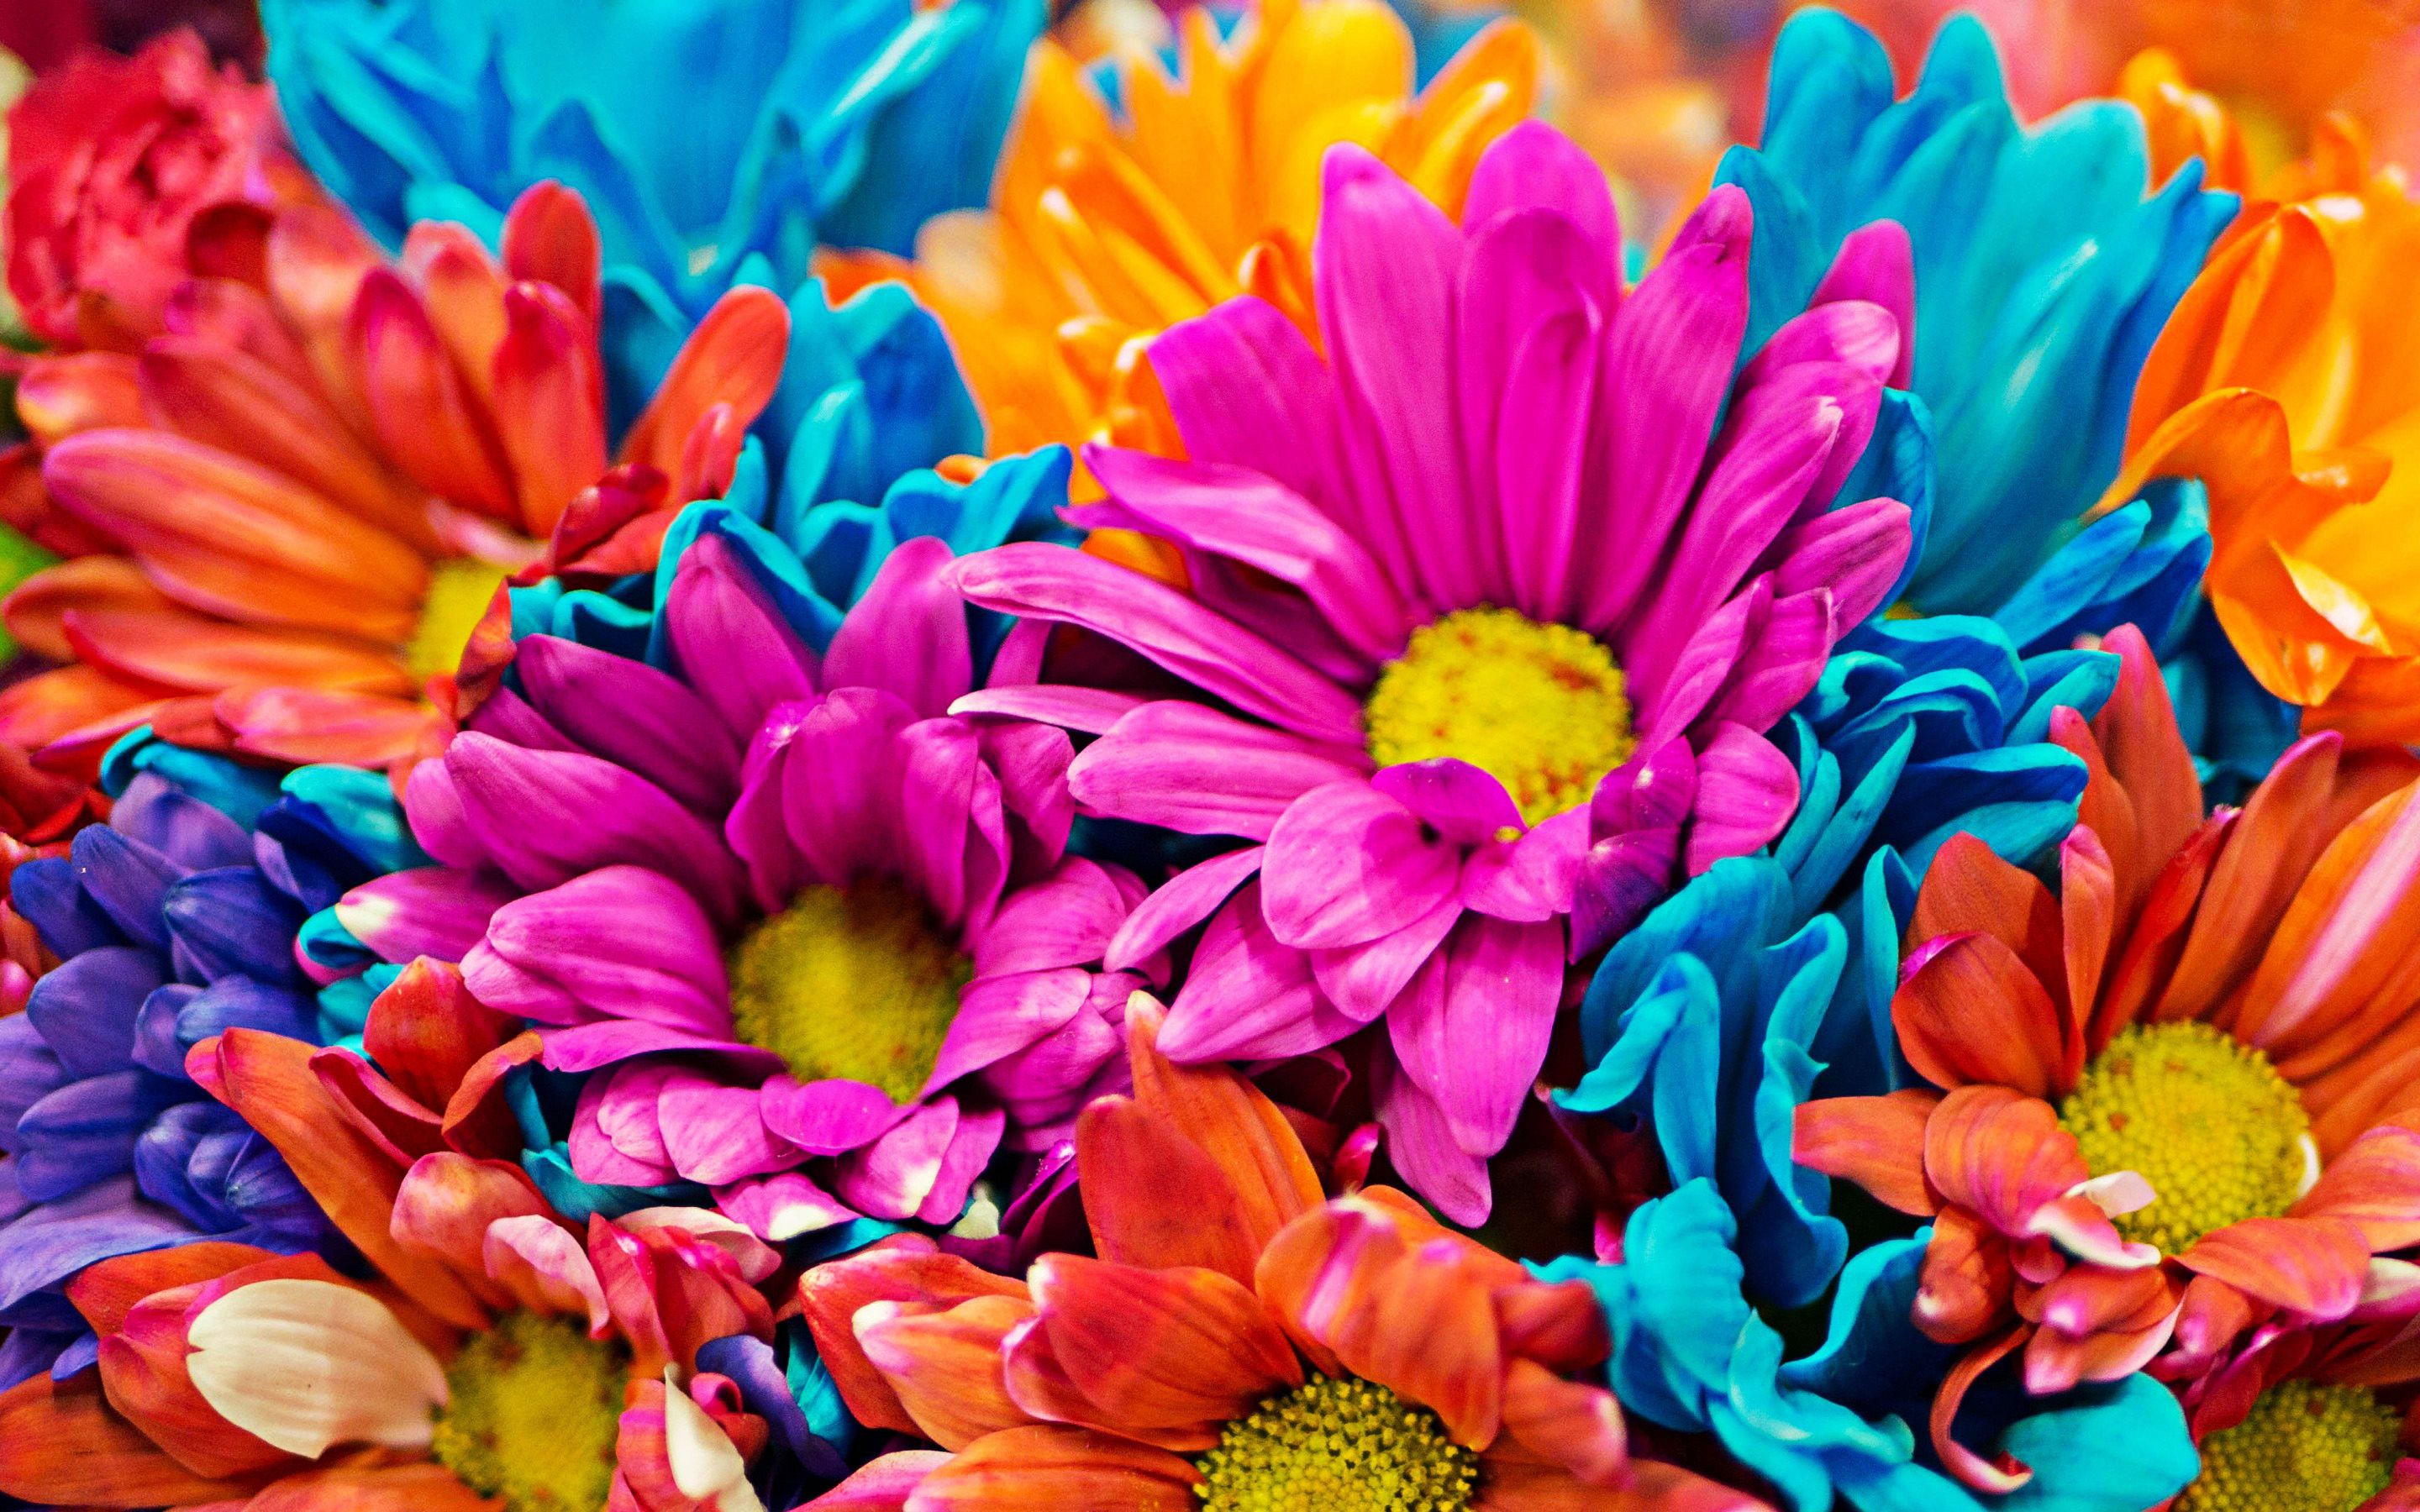 Download wallpaper colorful flowers, bouquet of colorful flowers